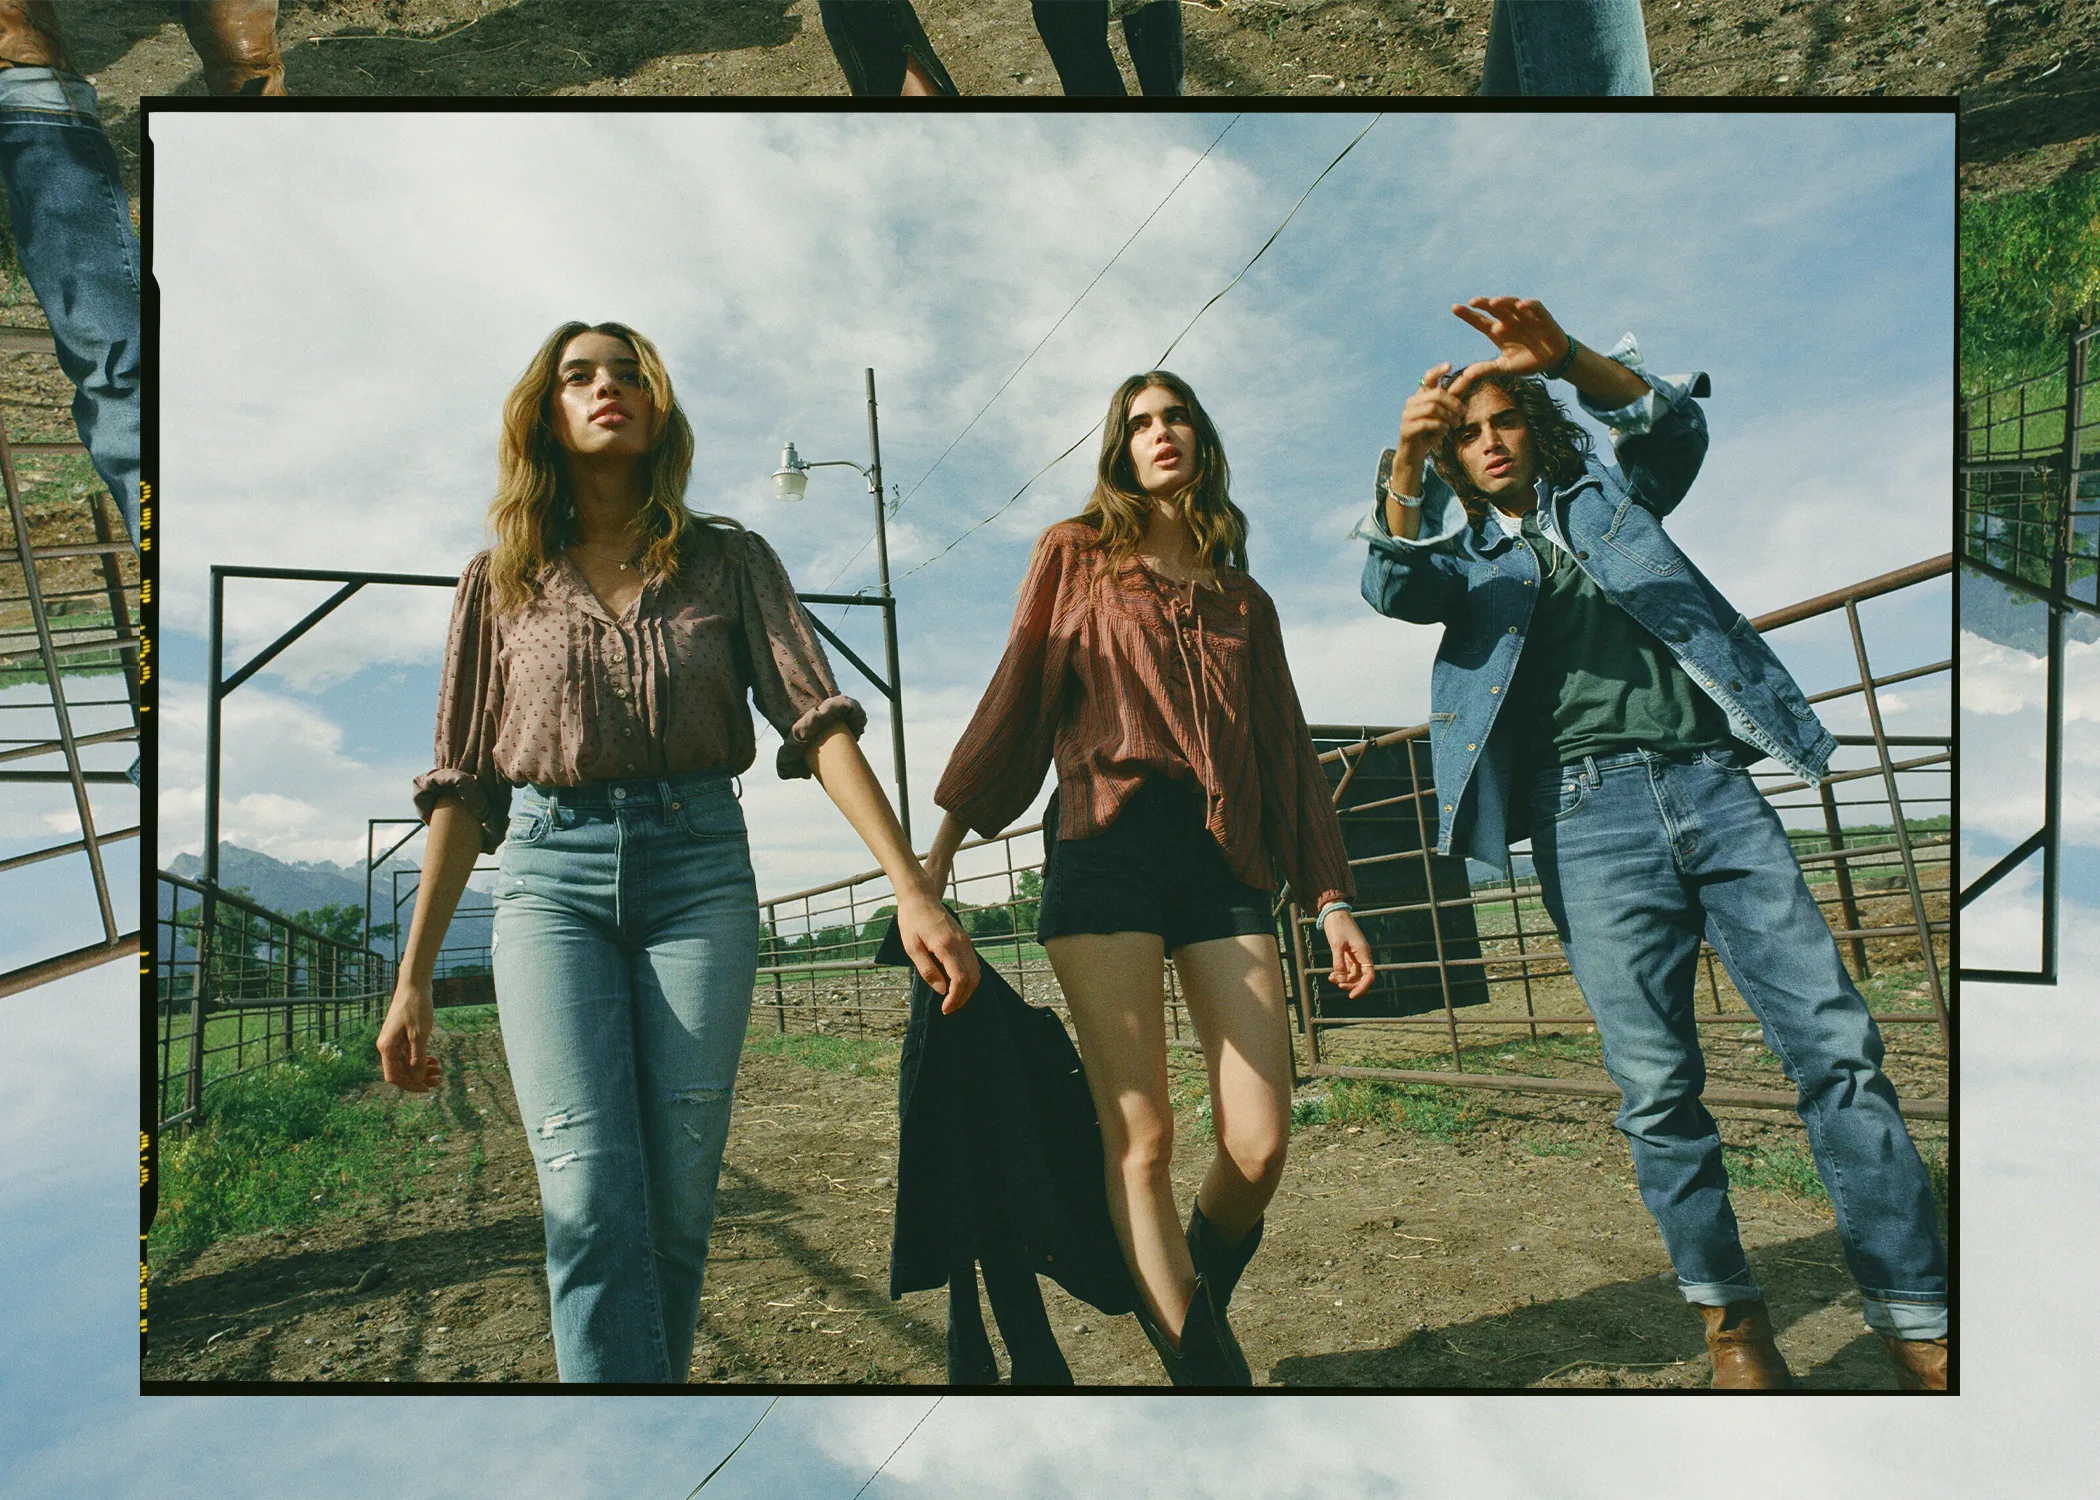 Barbato Collective, BarbatoCo, Daniel Barbato, Creative, Creative Direction, Art Direction, Lifestyle, Campaign, Brand, Lucky Brand, Americana, American Flag, Denim, Denim Campaign, Denim Editorial, Denim Photoshoot, Jackson Hole, Wyoming, Big Sky, Outdoors, American Landscape, America, USA, Iconic, Epic, Timeless, Fashion, Style, Jeans, Rugged, Western Style, Western Wear, Womenswear, Menswear, Adventure, Roadtrip, Effortless, Casual, Ethereal, Pattern, Sweater, Americana, Road, Scenic, Horizon, Film, 120, Medium Format, Group, Friends, Ranch, Farm, Horses, Corral